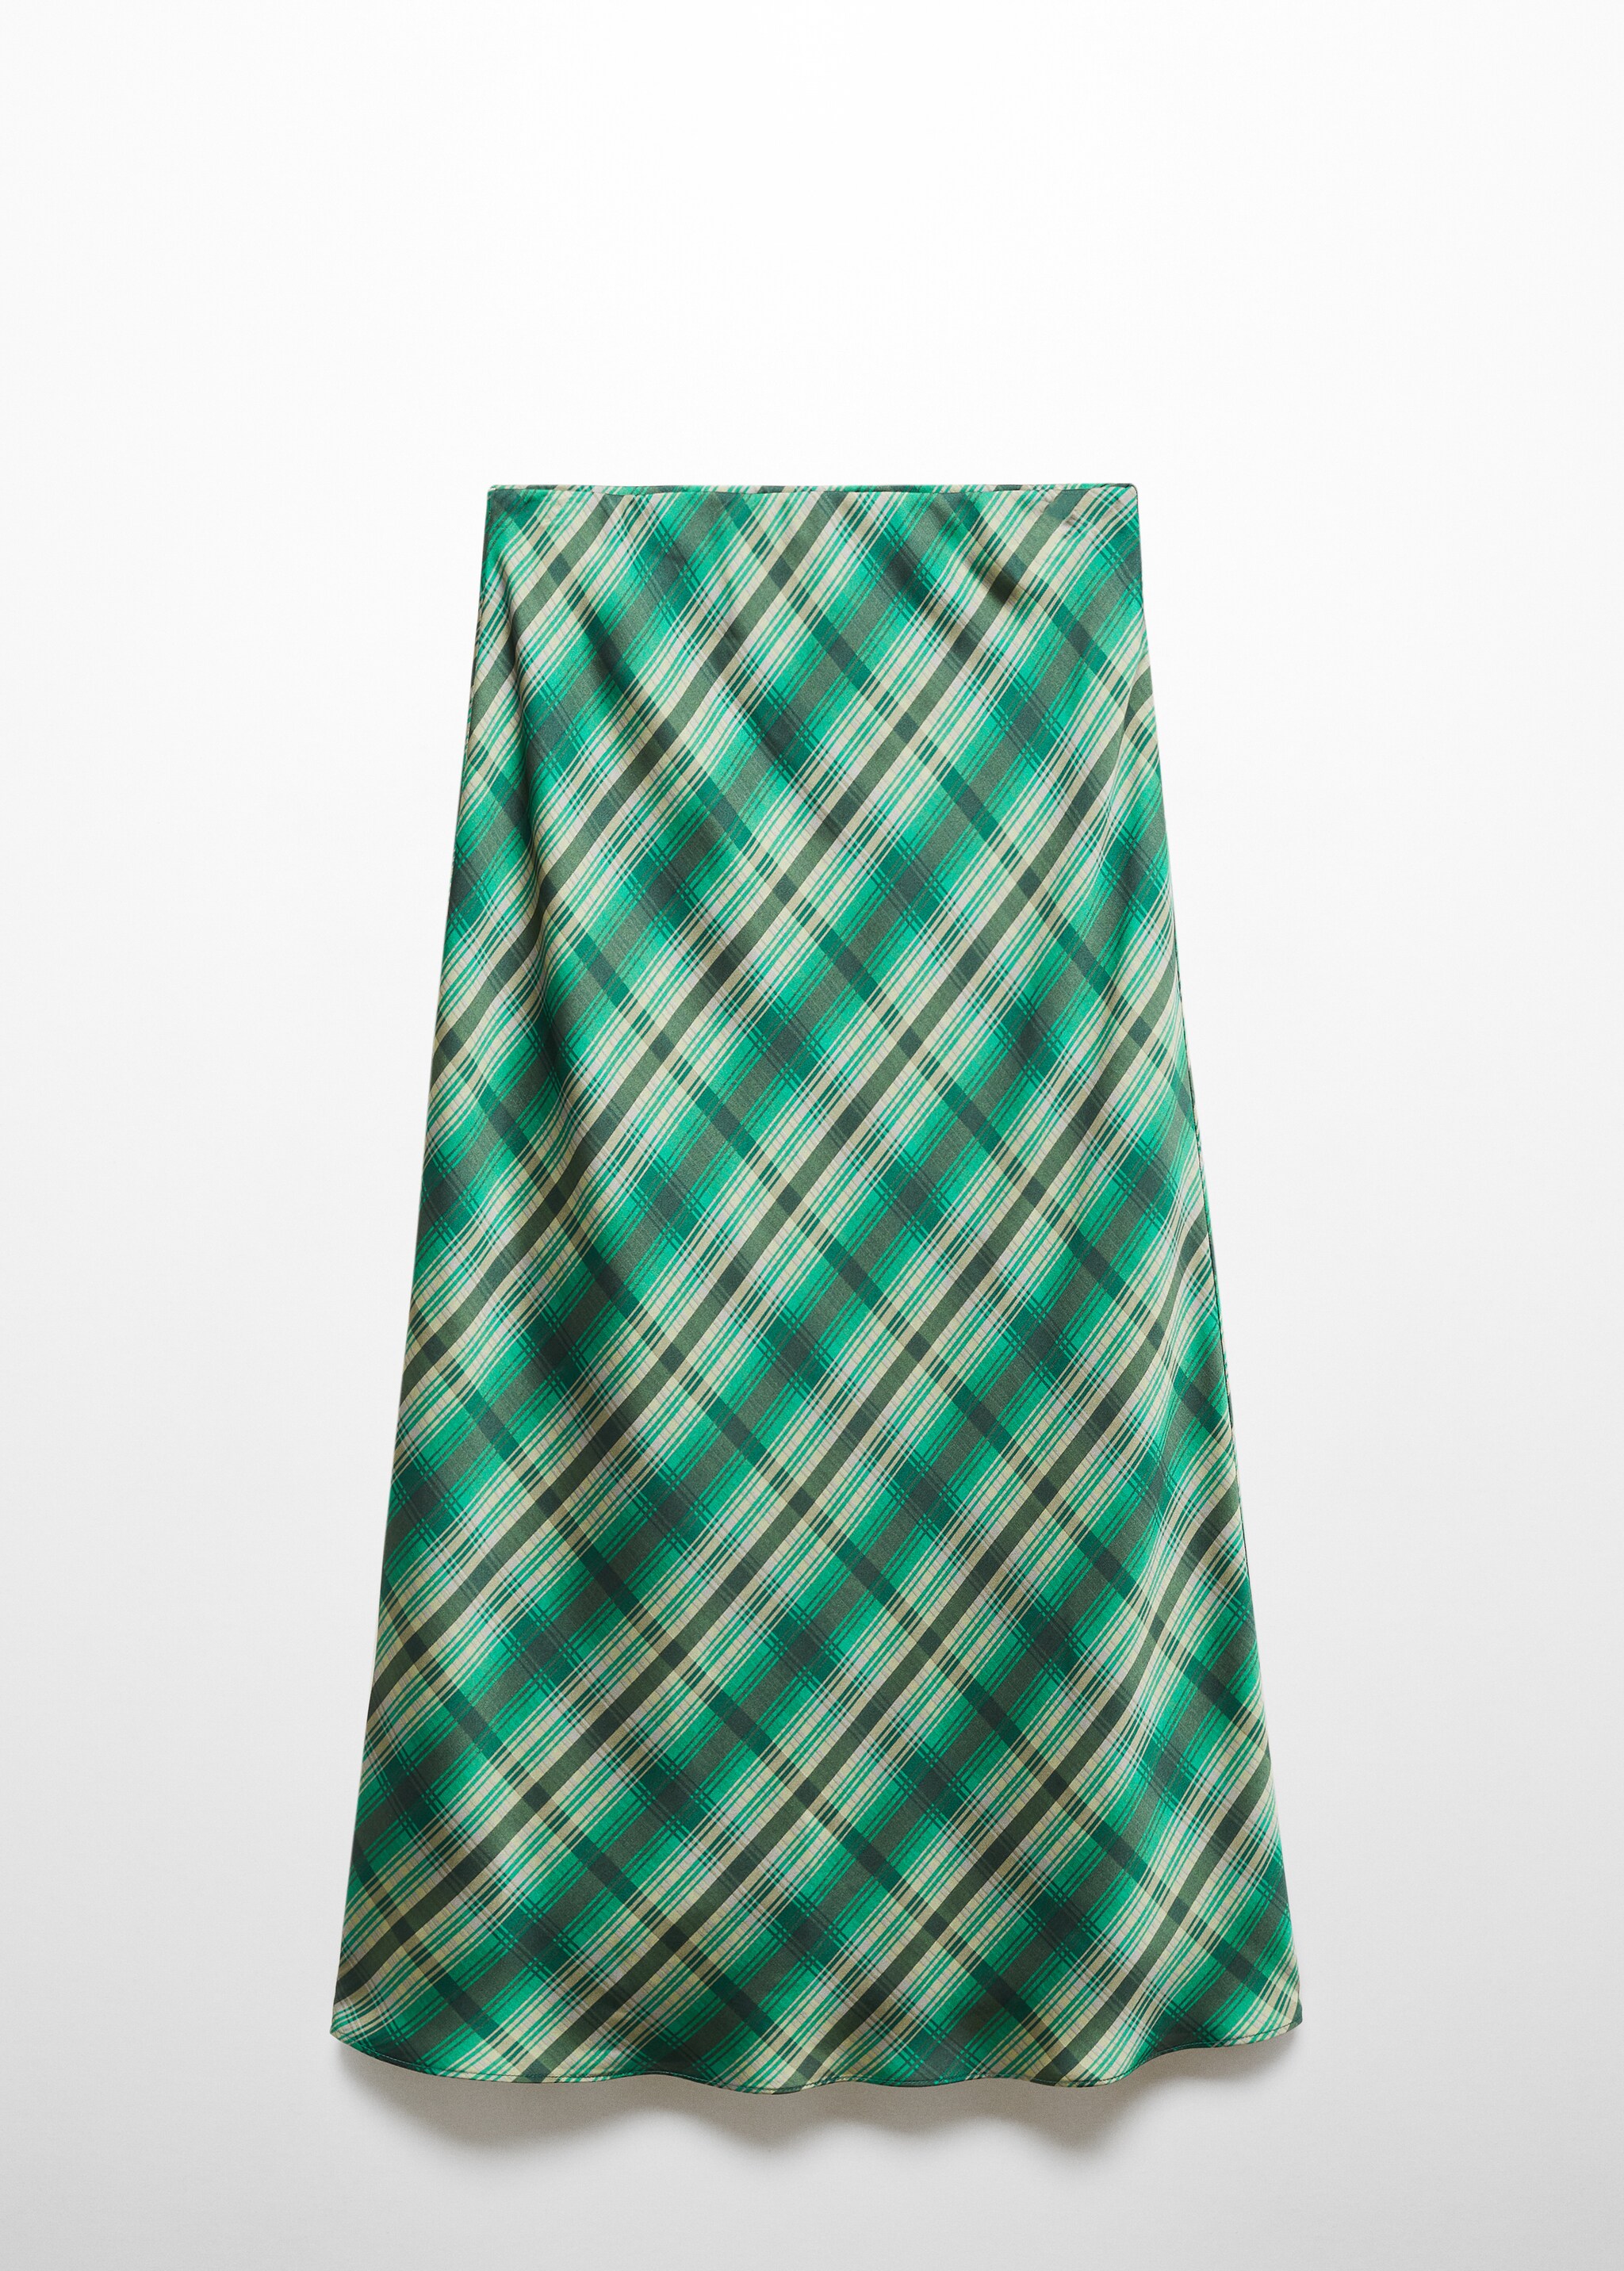 Satin check skirt - Article without model